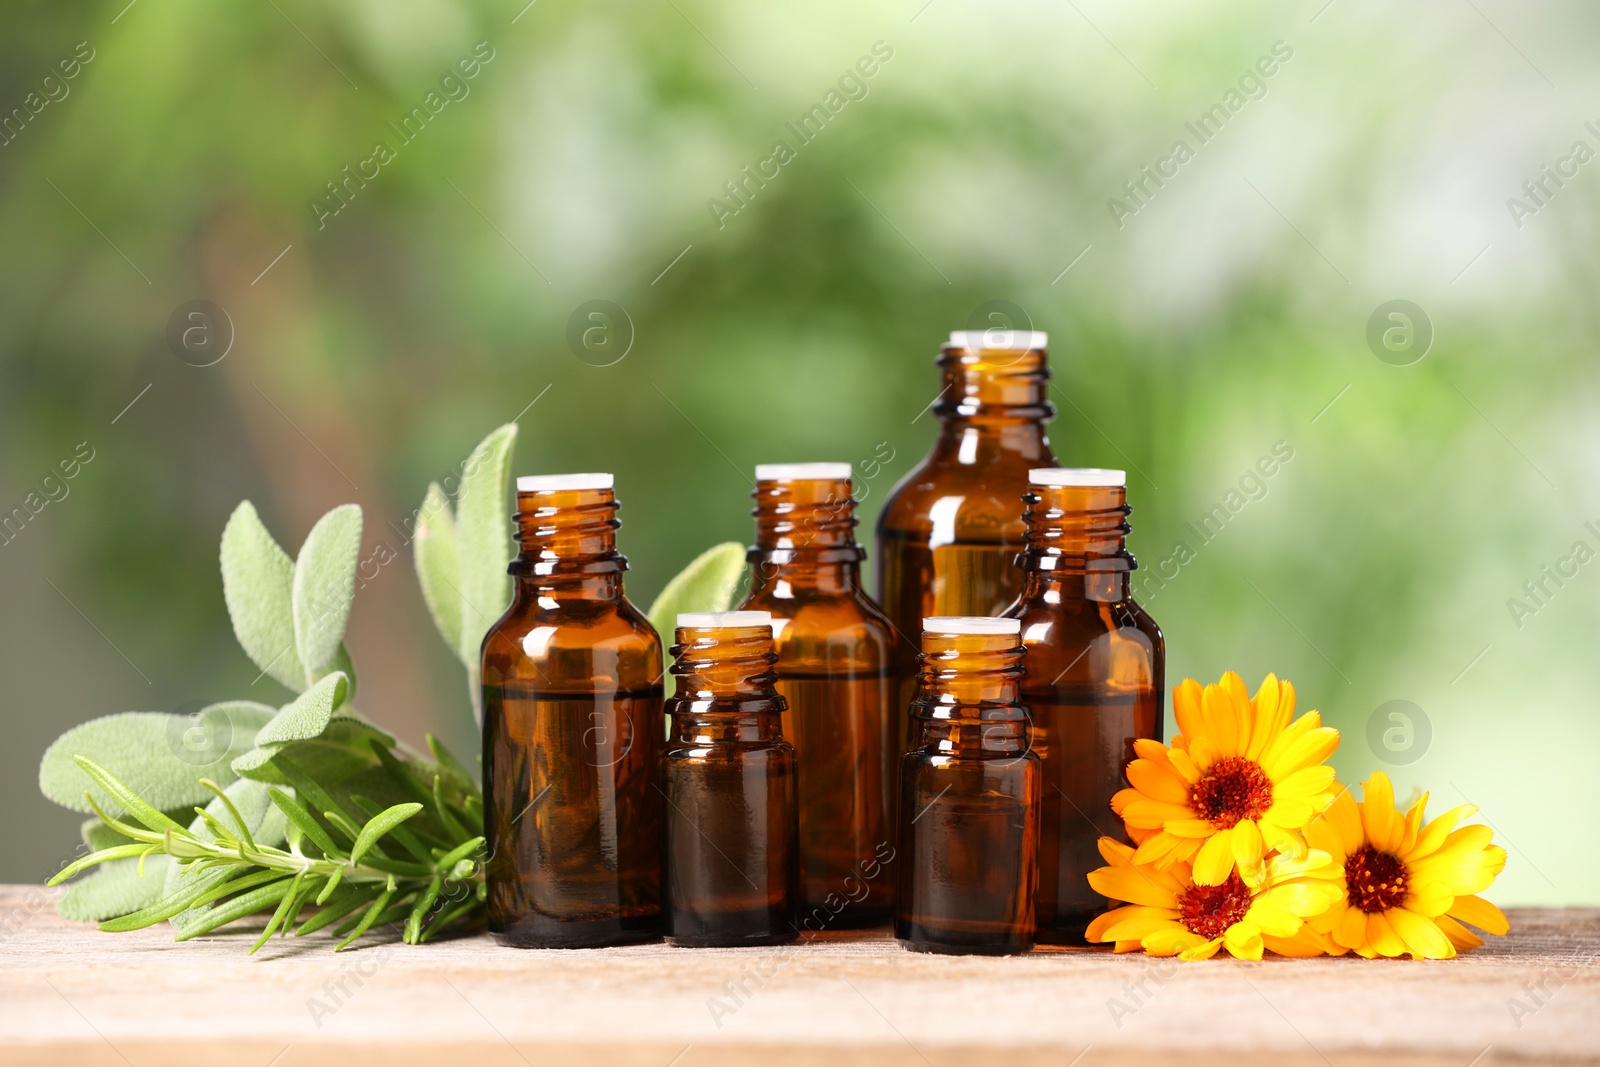 Photo of Bottles with essential oils, herbs and flowers on wooden table against blurred green background